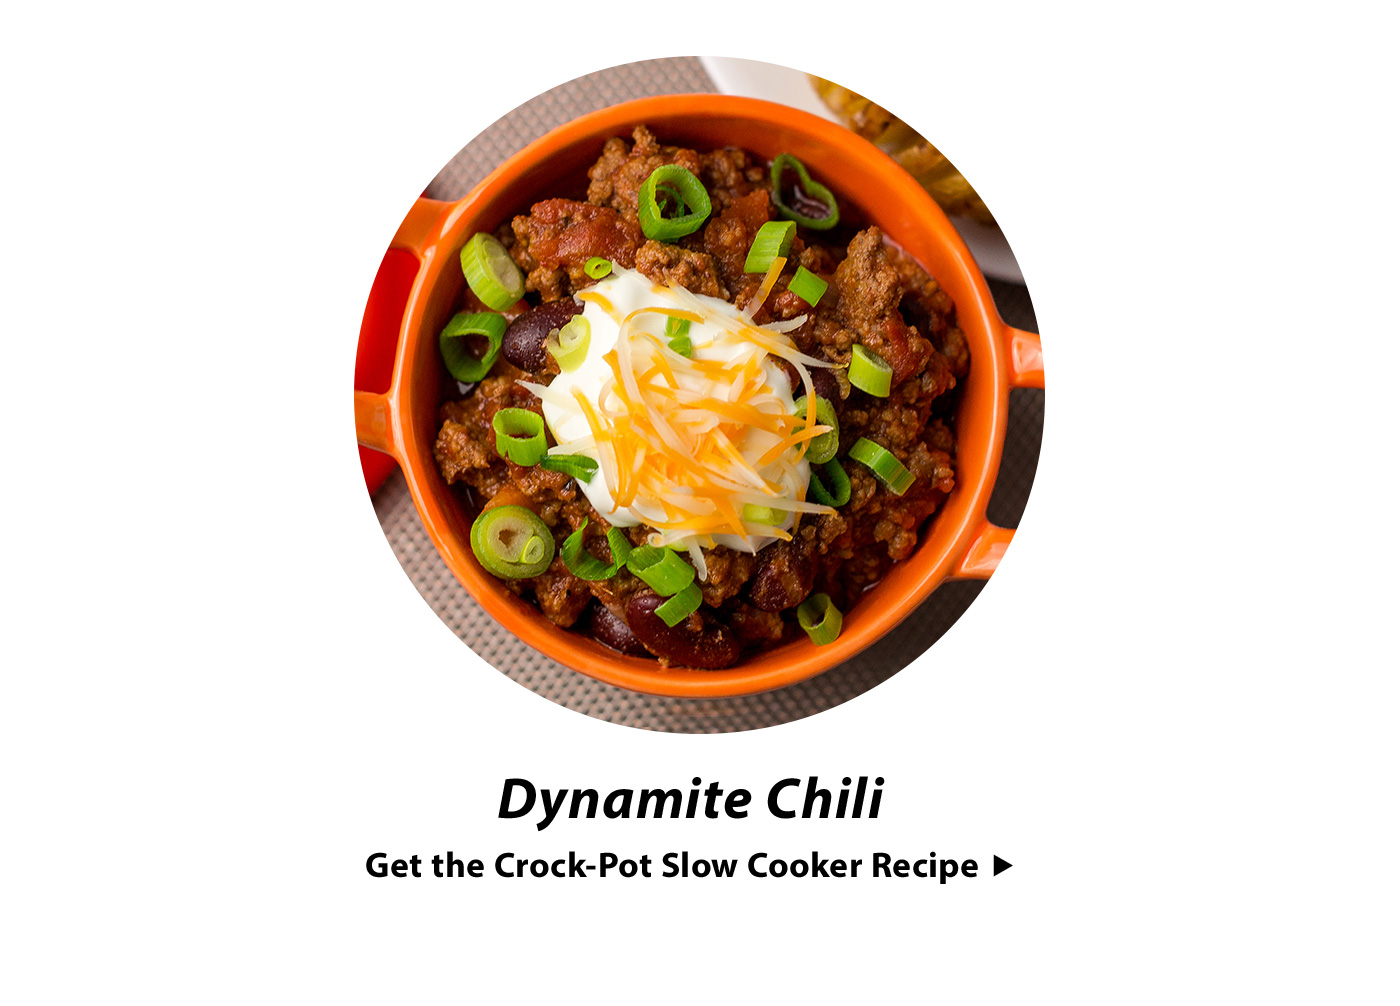 Dynamite Chili. Get the Crock-Pot Slow Cooker Recipe